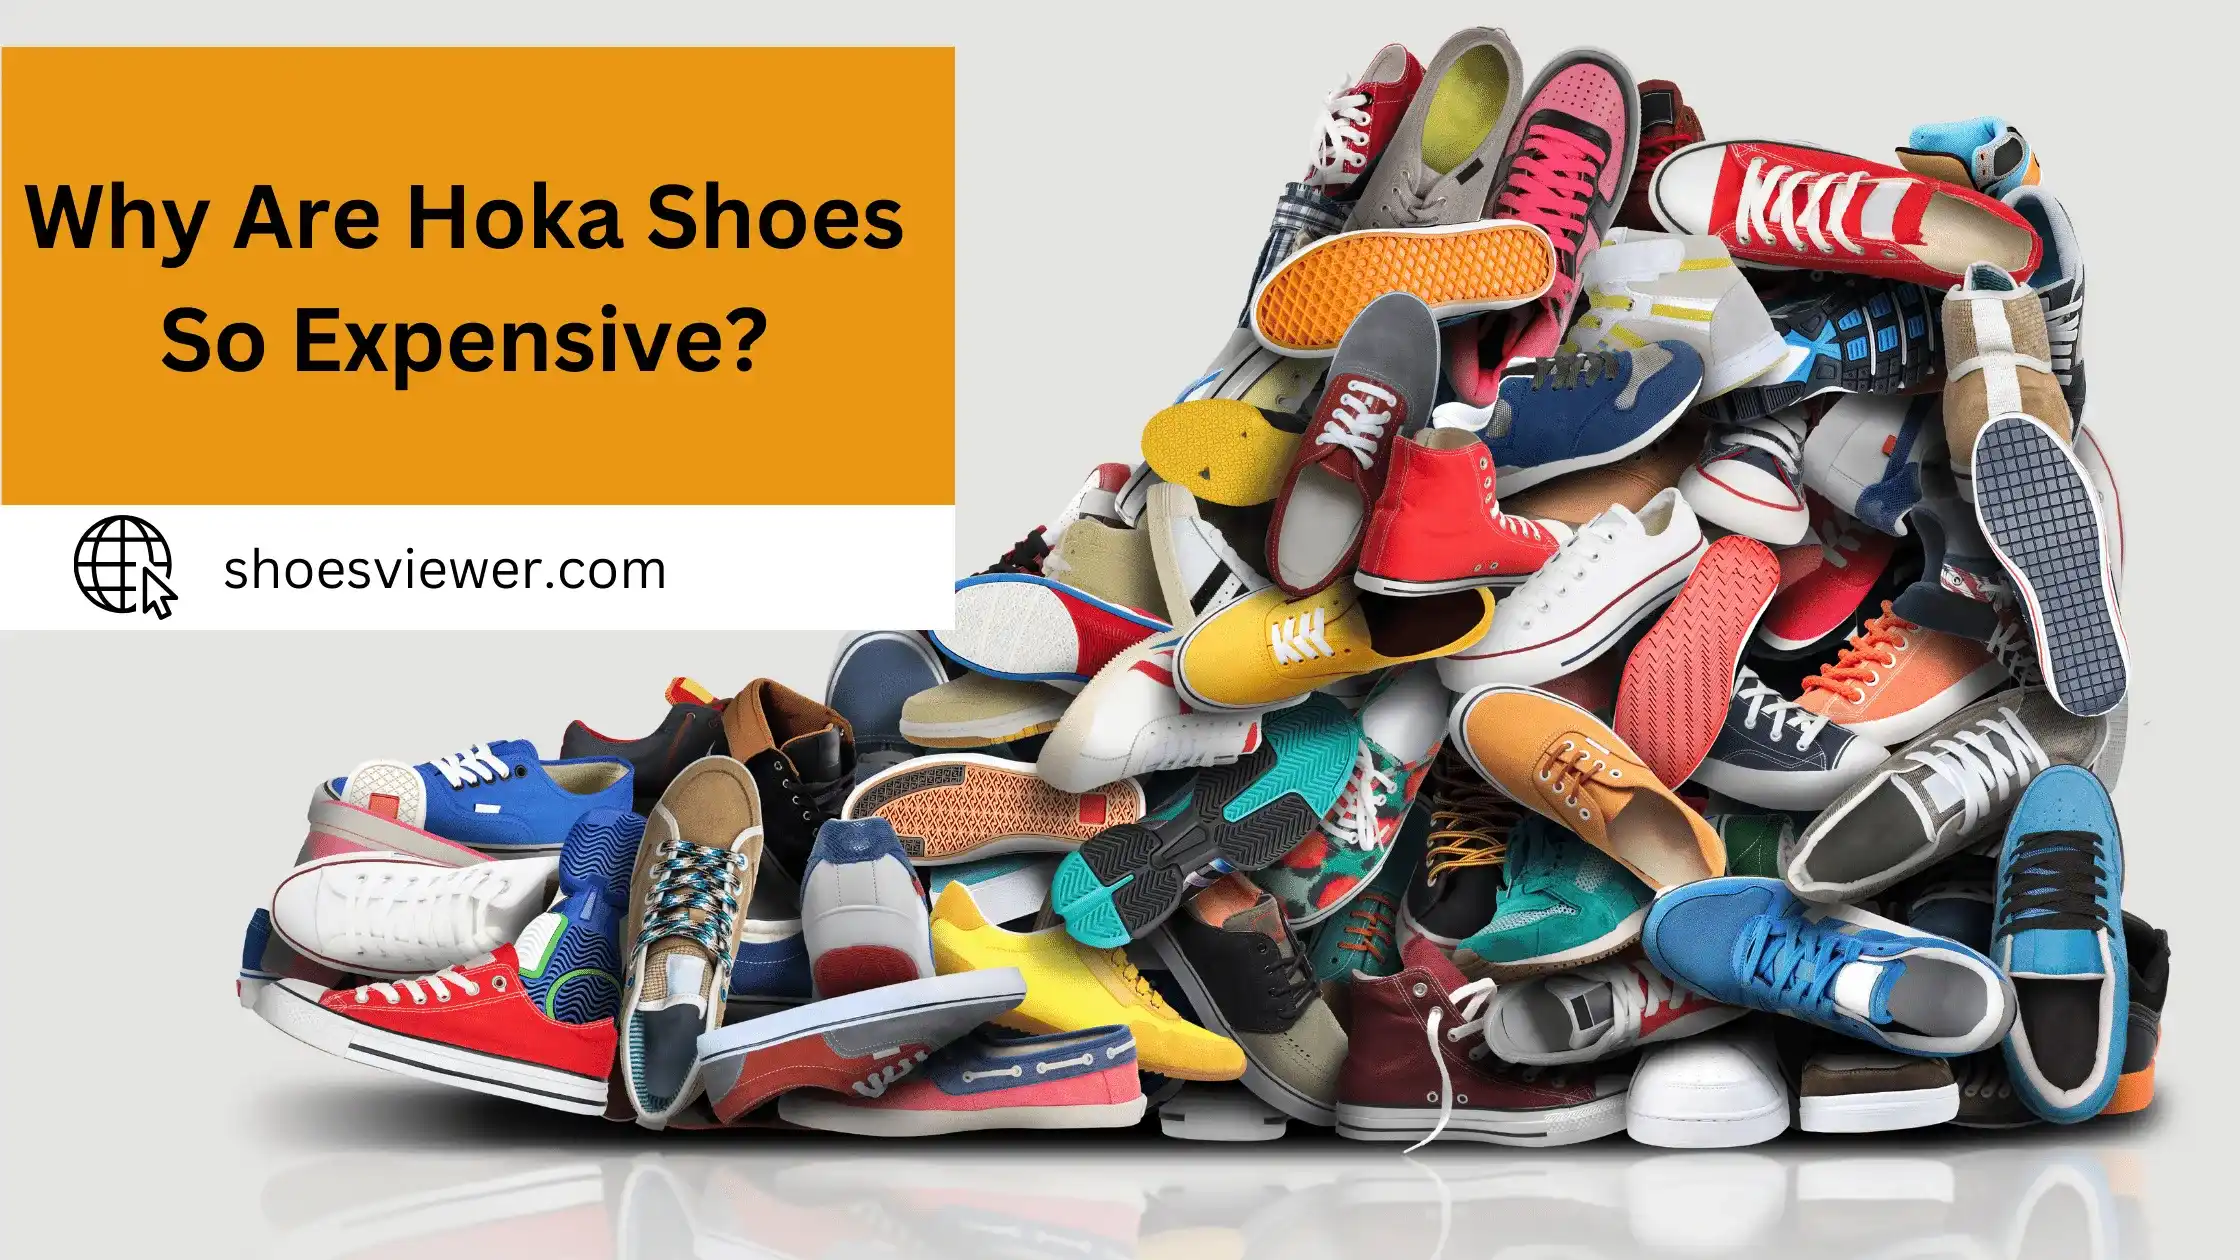 Why Are Hoka Shoes So Expensive? (An In-Depth Guide)